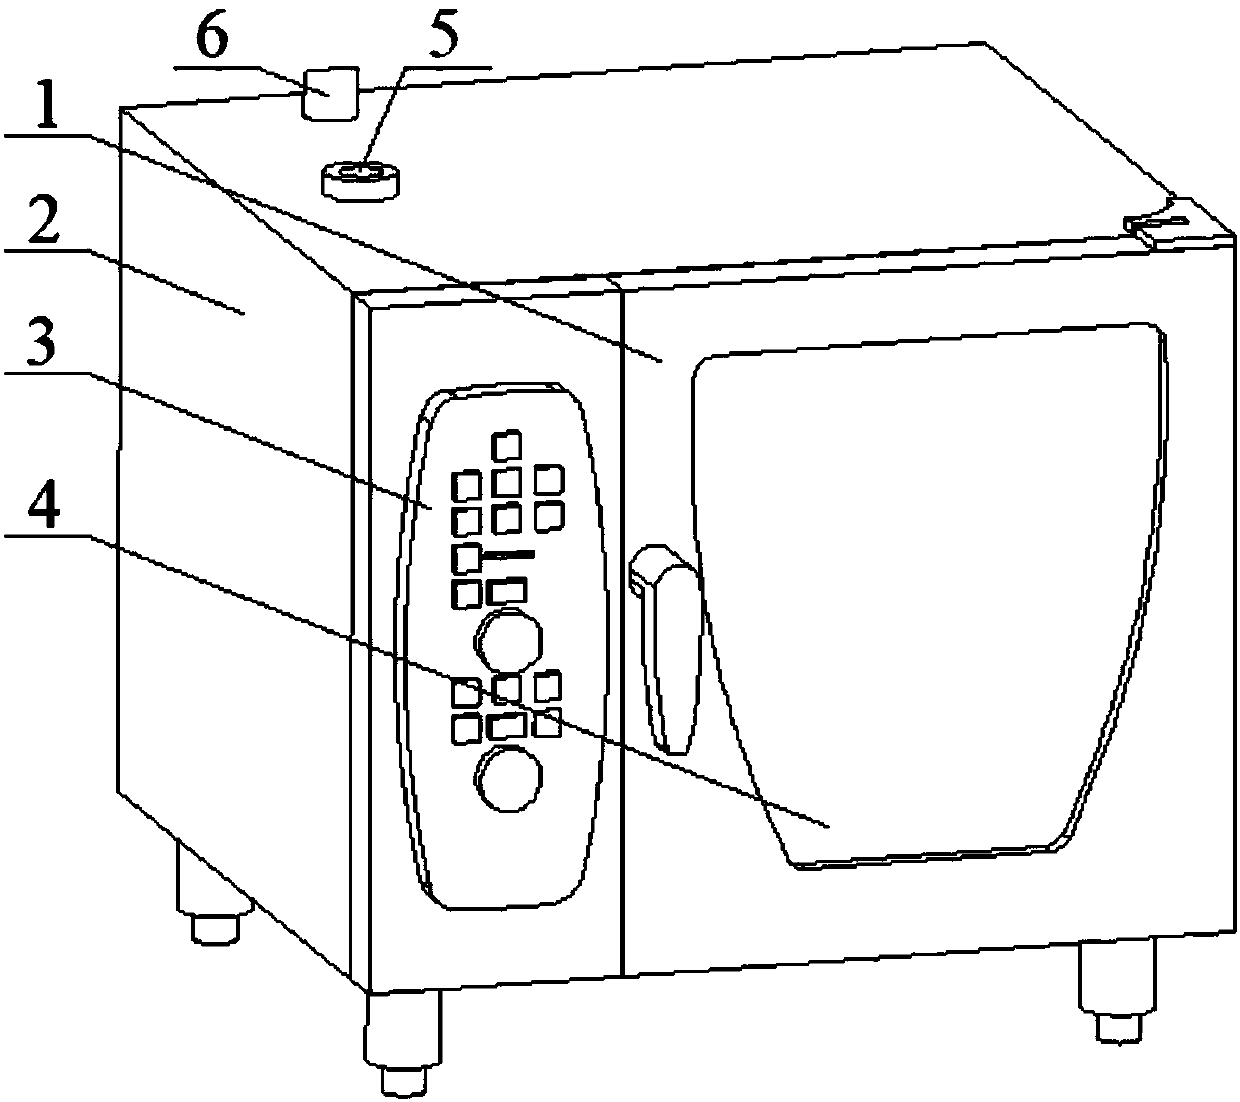 Steaming oven having multiple operating modes